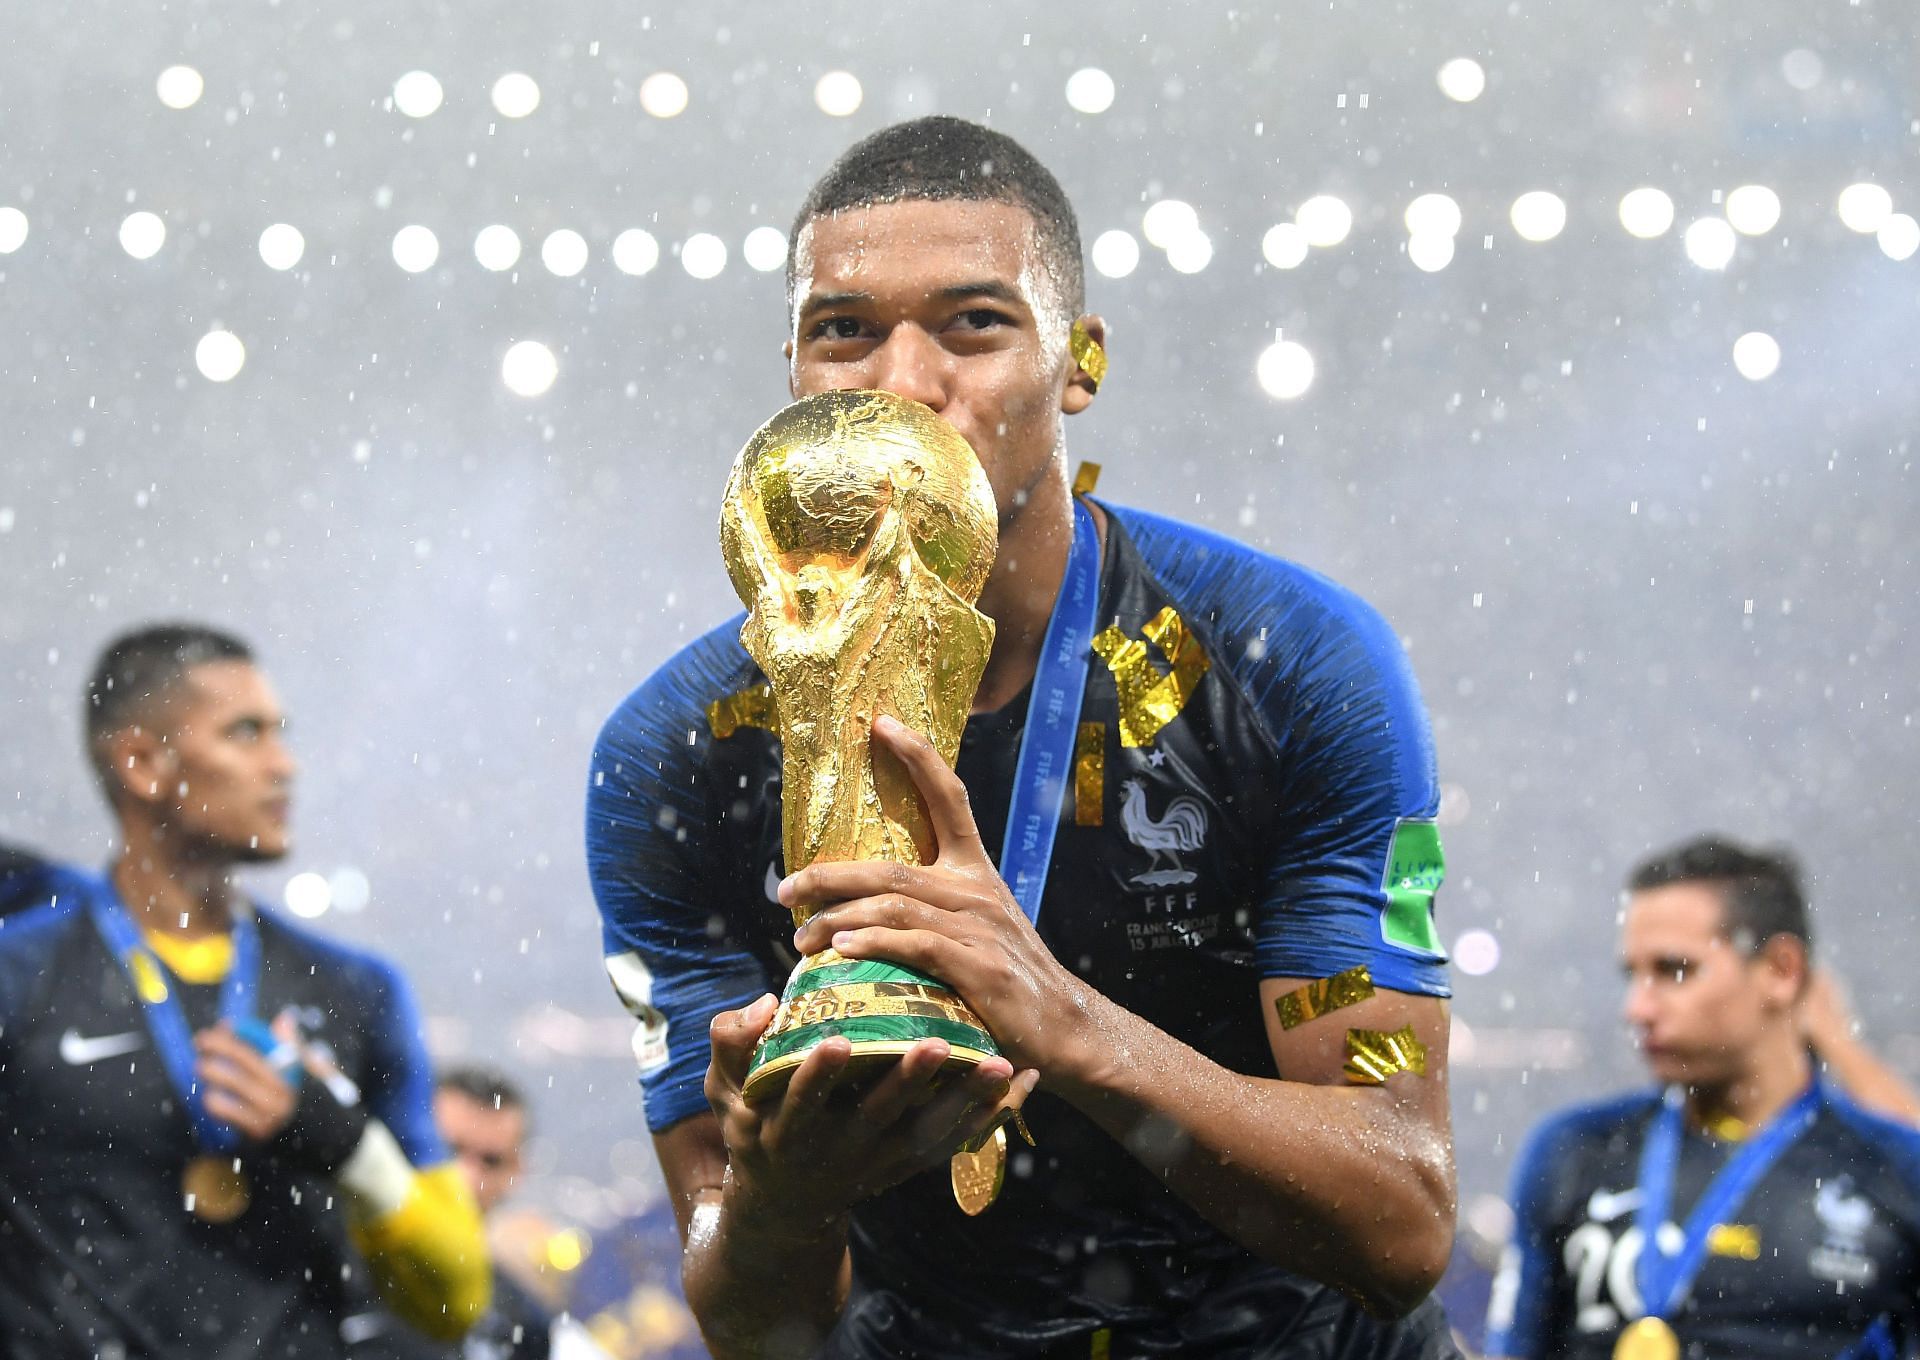 Mbappe on winning the World Cup in 2018